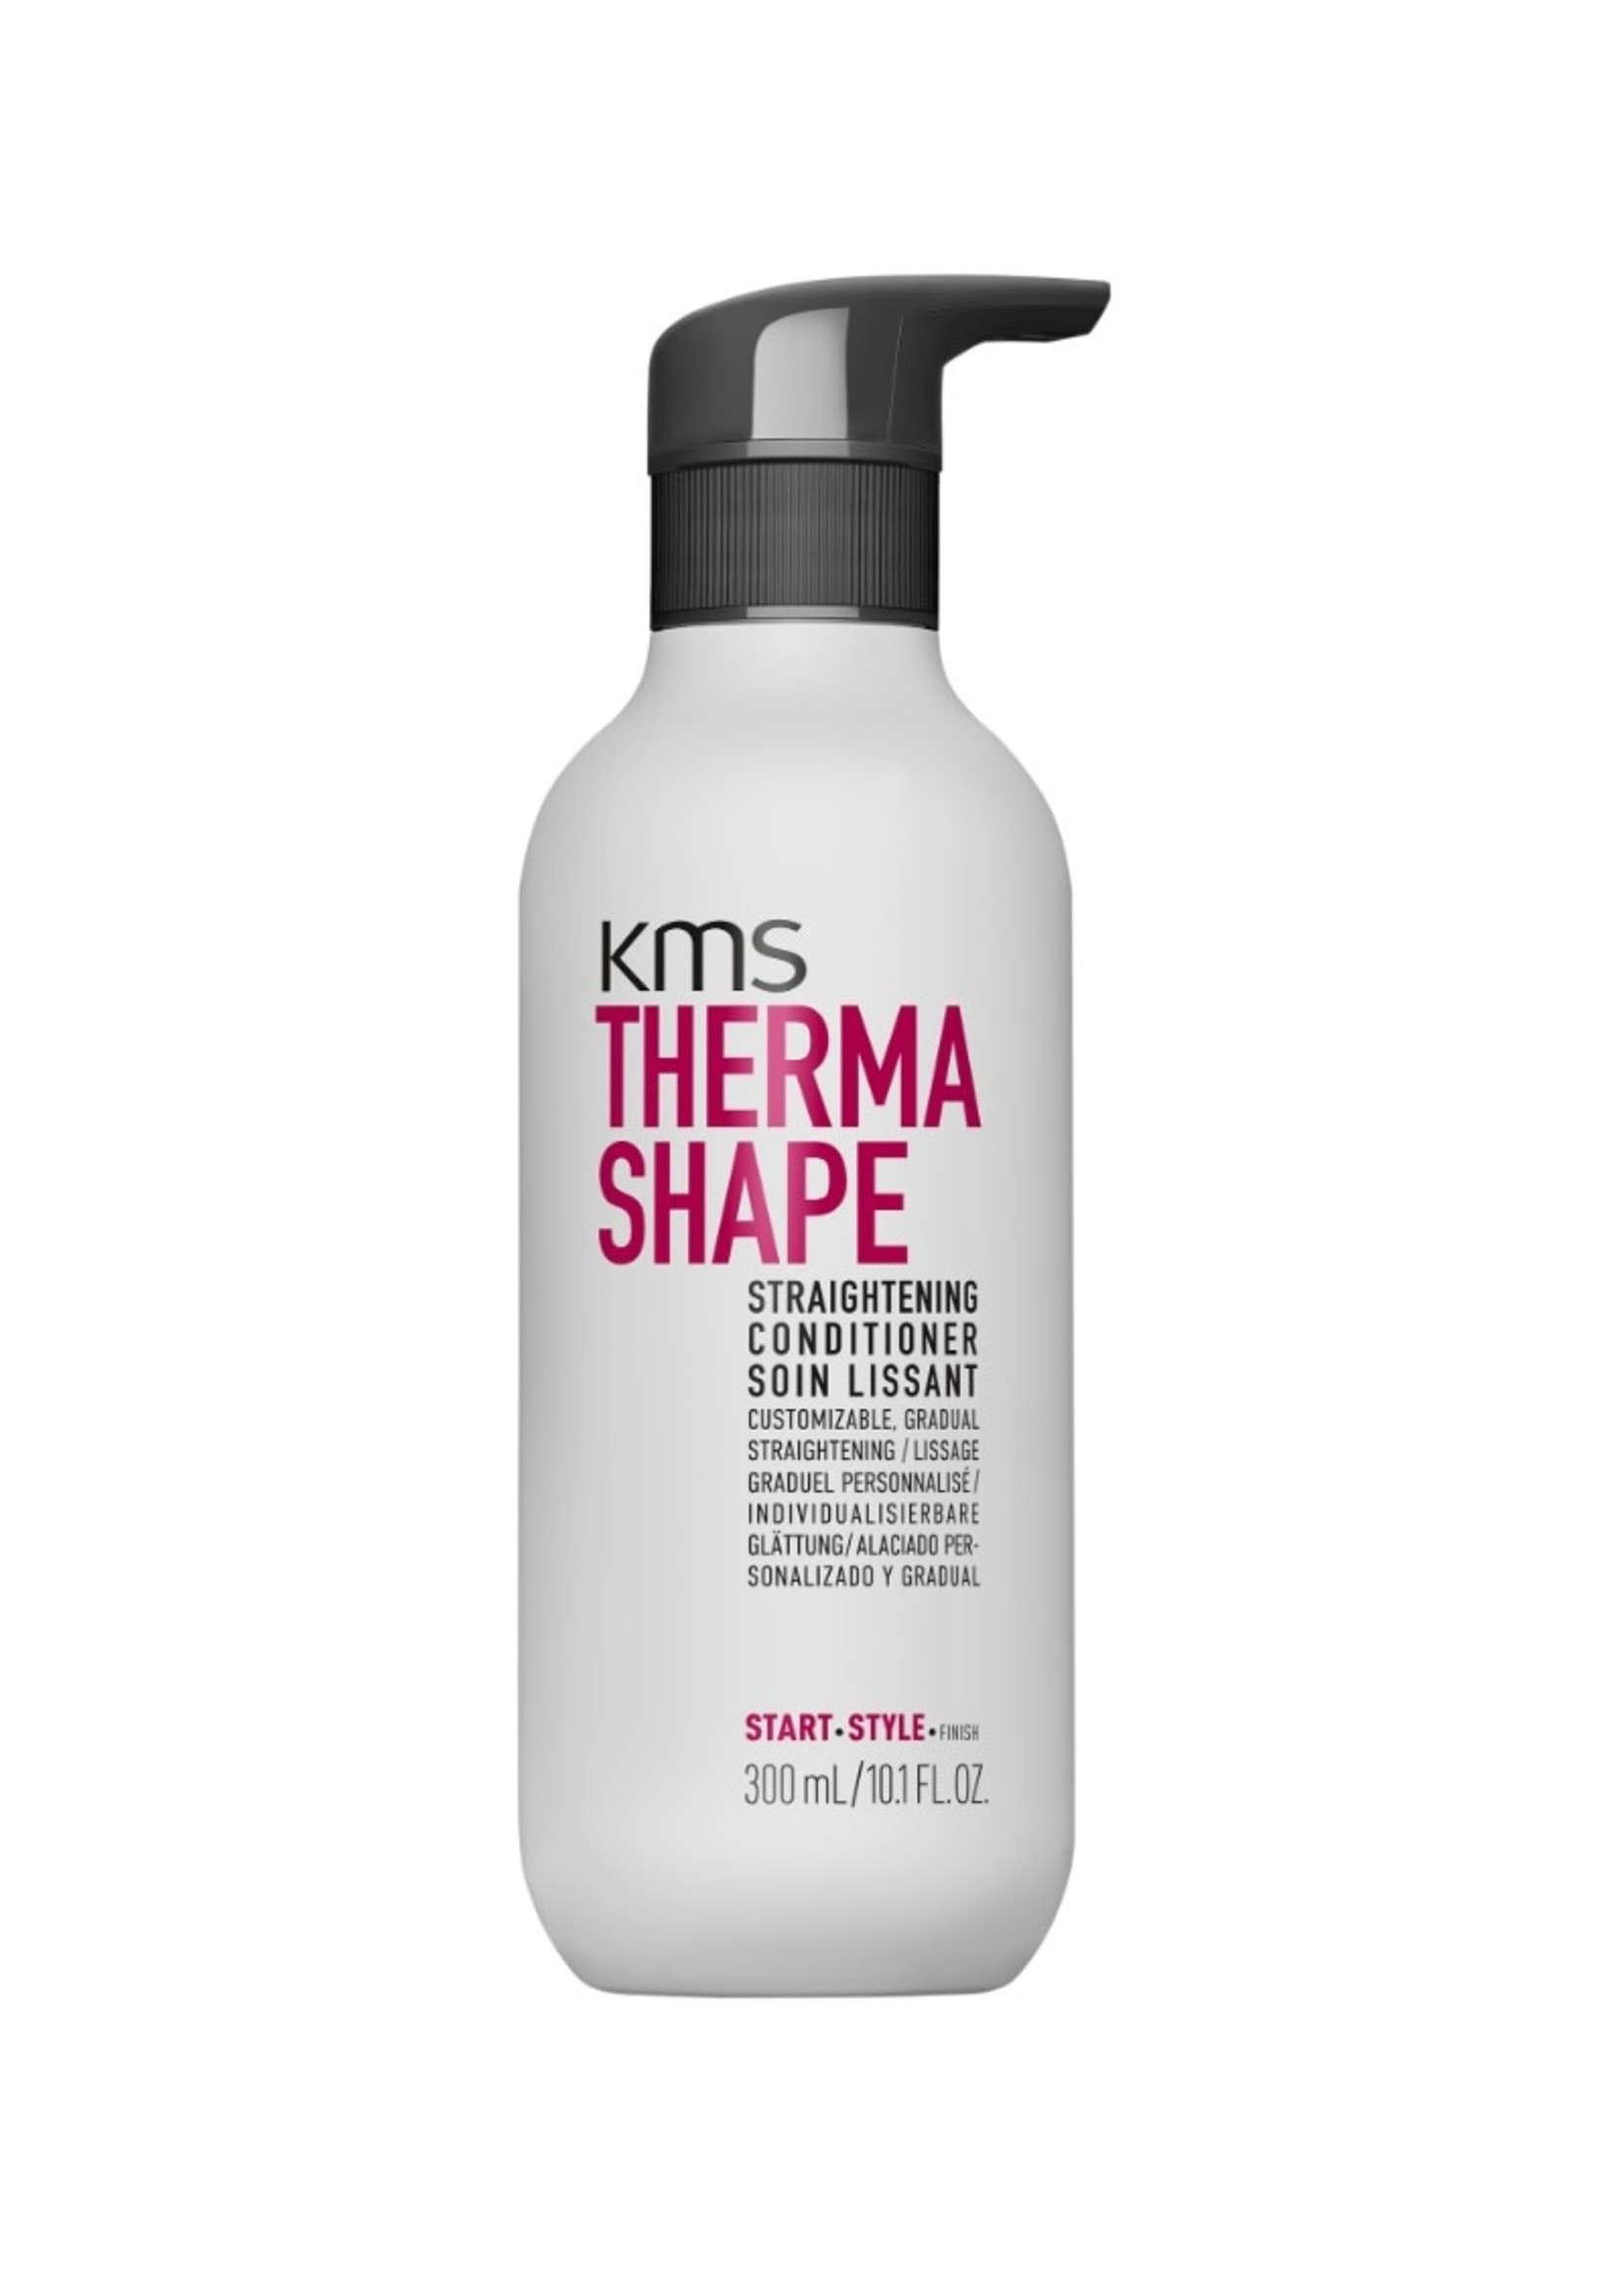 KMS KMS Thermashape Straightening Conditioner 300ml